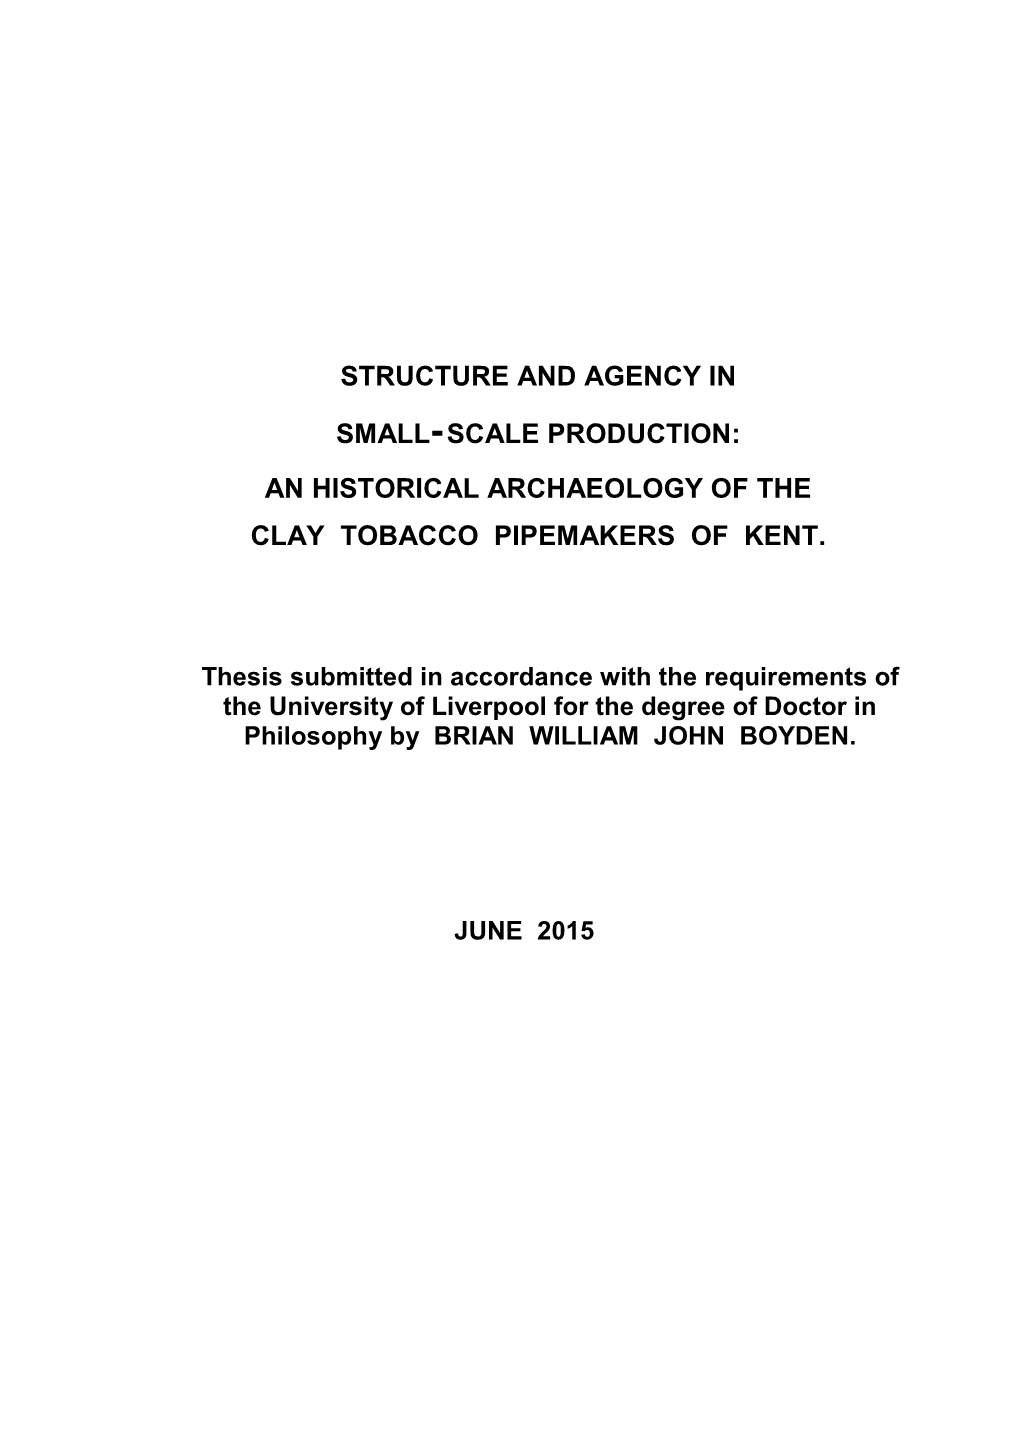 An Historical Archaeology of the Clay Tobacco Pipemakers of Kent